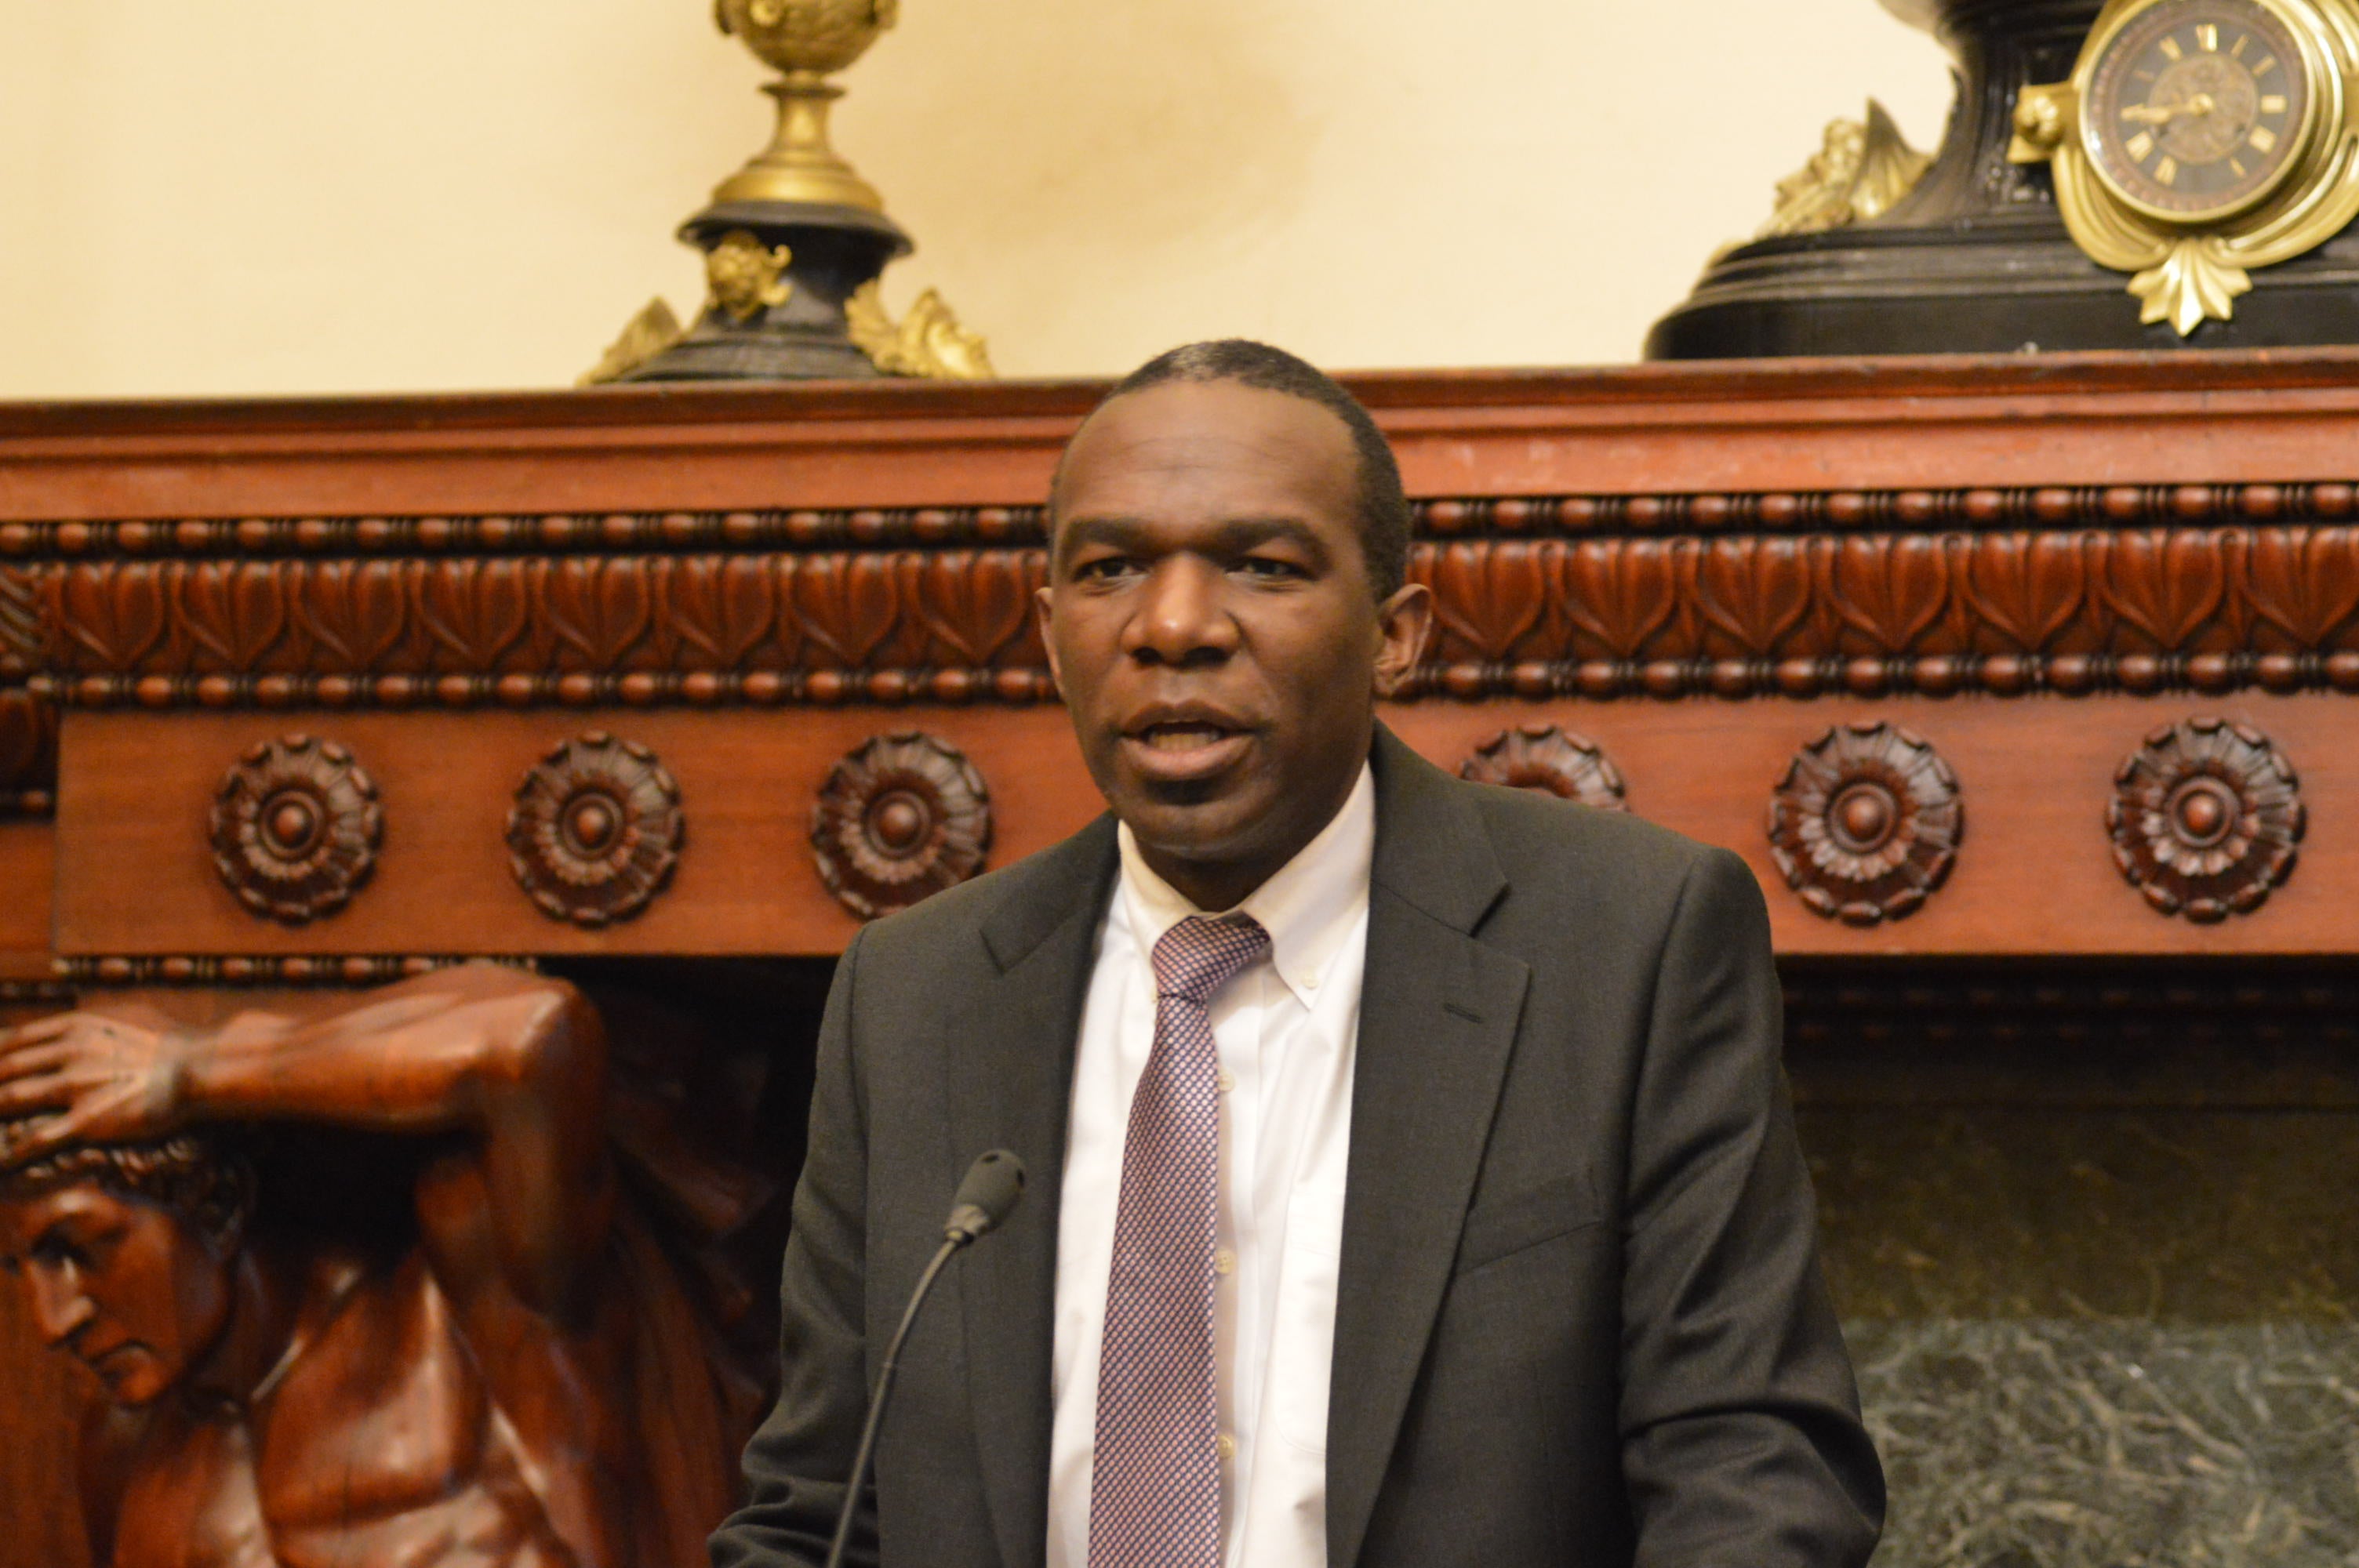  Philadelphia City Solicitor Sozi Tulante has filed suit on the city's behalf against Wells Fargo & Co. bank, claiming discriminatory lending practices.  (Tom MacDonald/WHYY) 